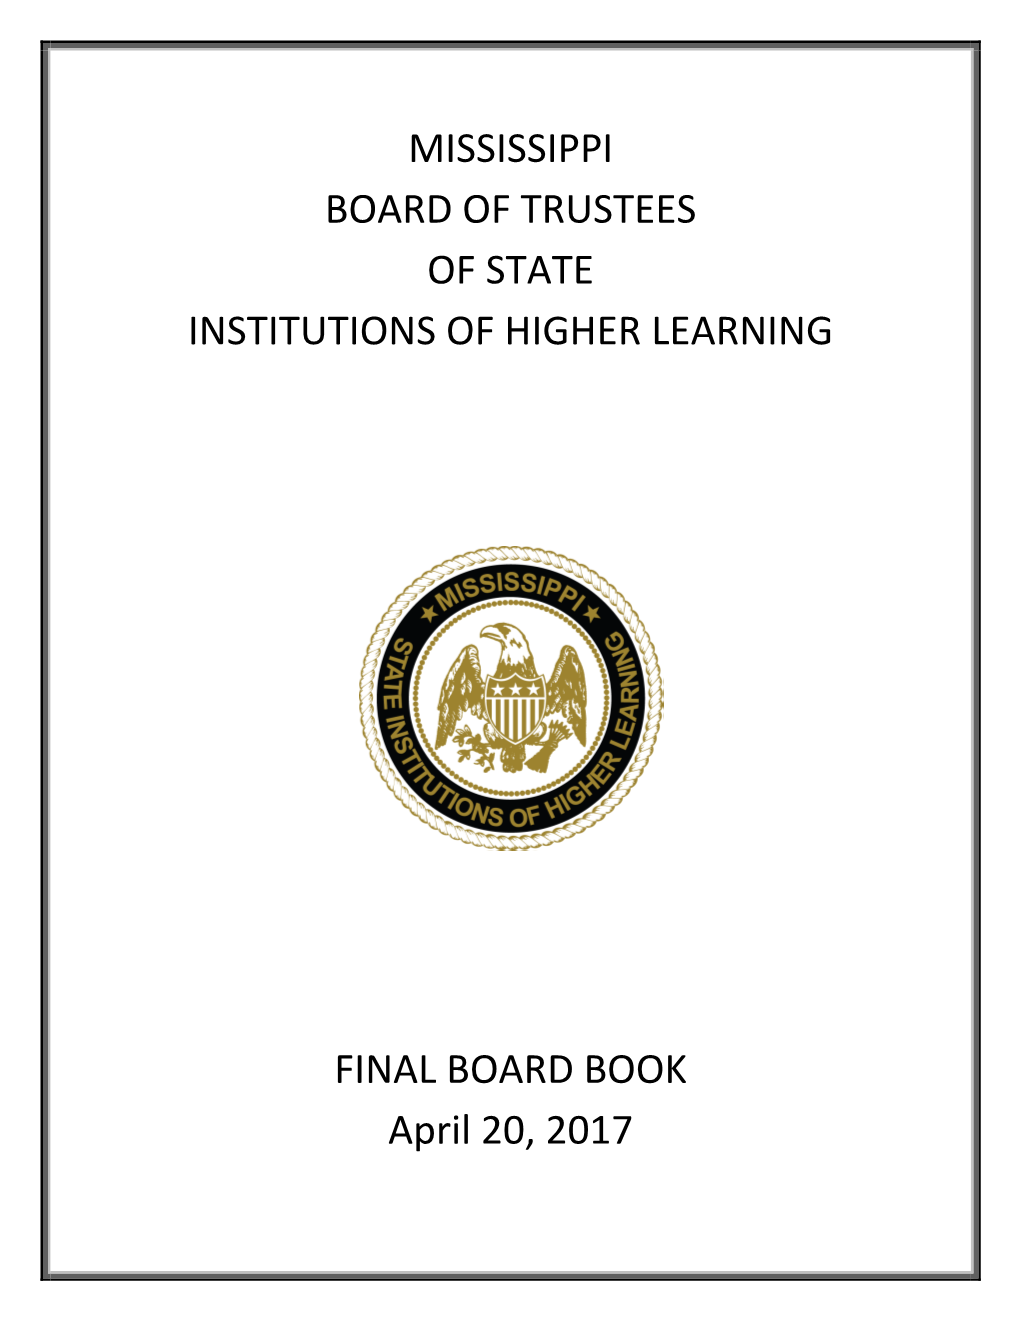 MISSISSIPPI BOARD of TRUSTEES of STATE INSTITUTIONS of HIGHER LEARNING FINAL BOARD BOOK April 20, 2017